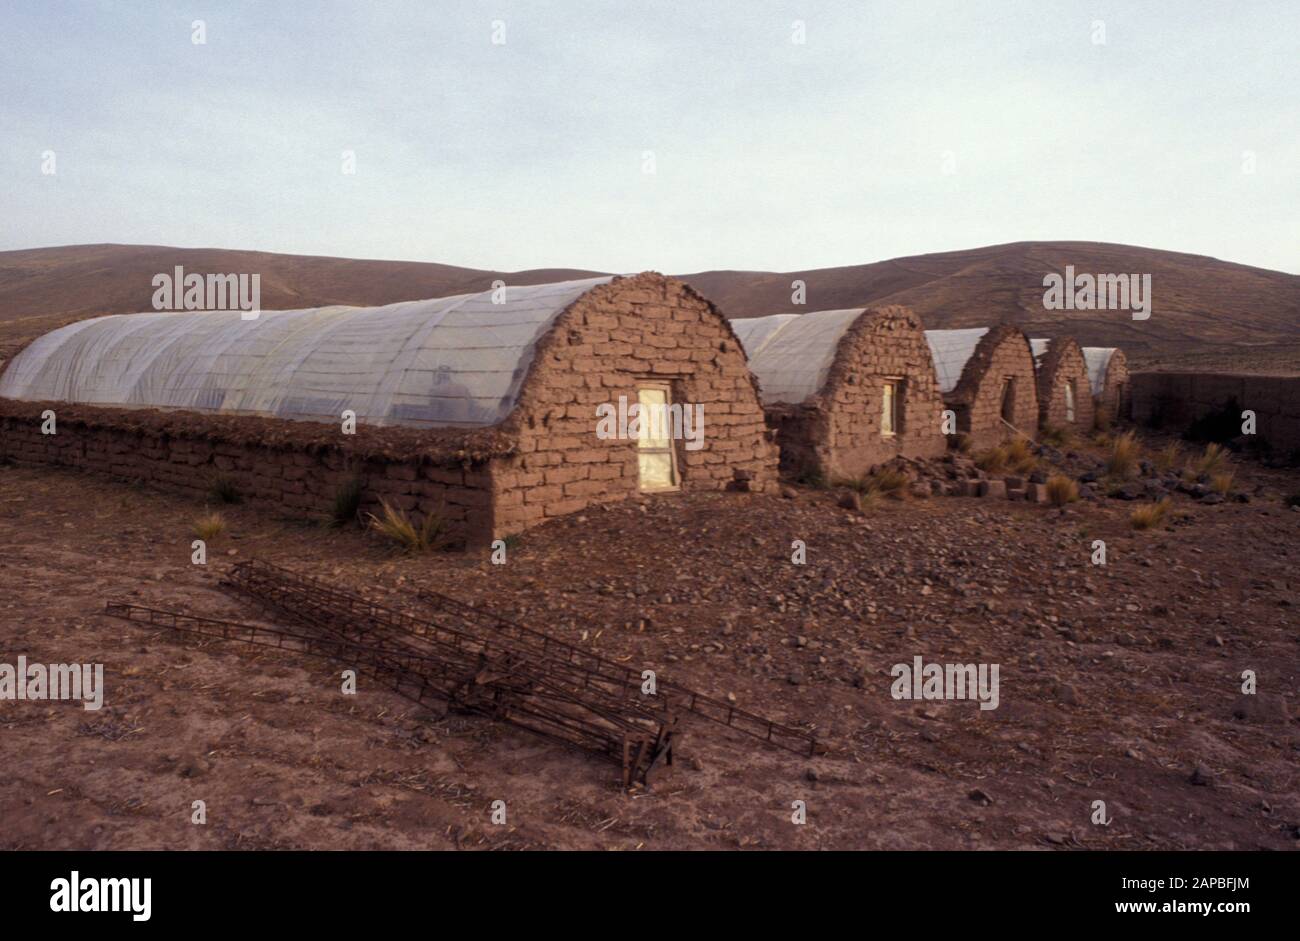 BOLIVIA  Greenhouse made from plastic sheeting and adobe blocks, El Alto  photo by Sean Sprague Stock Photo